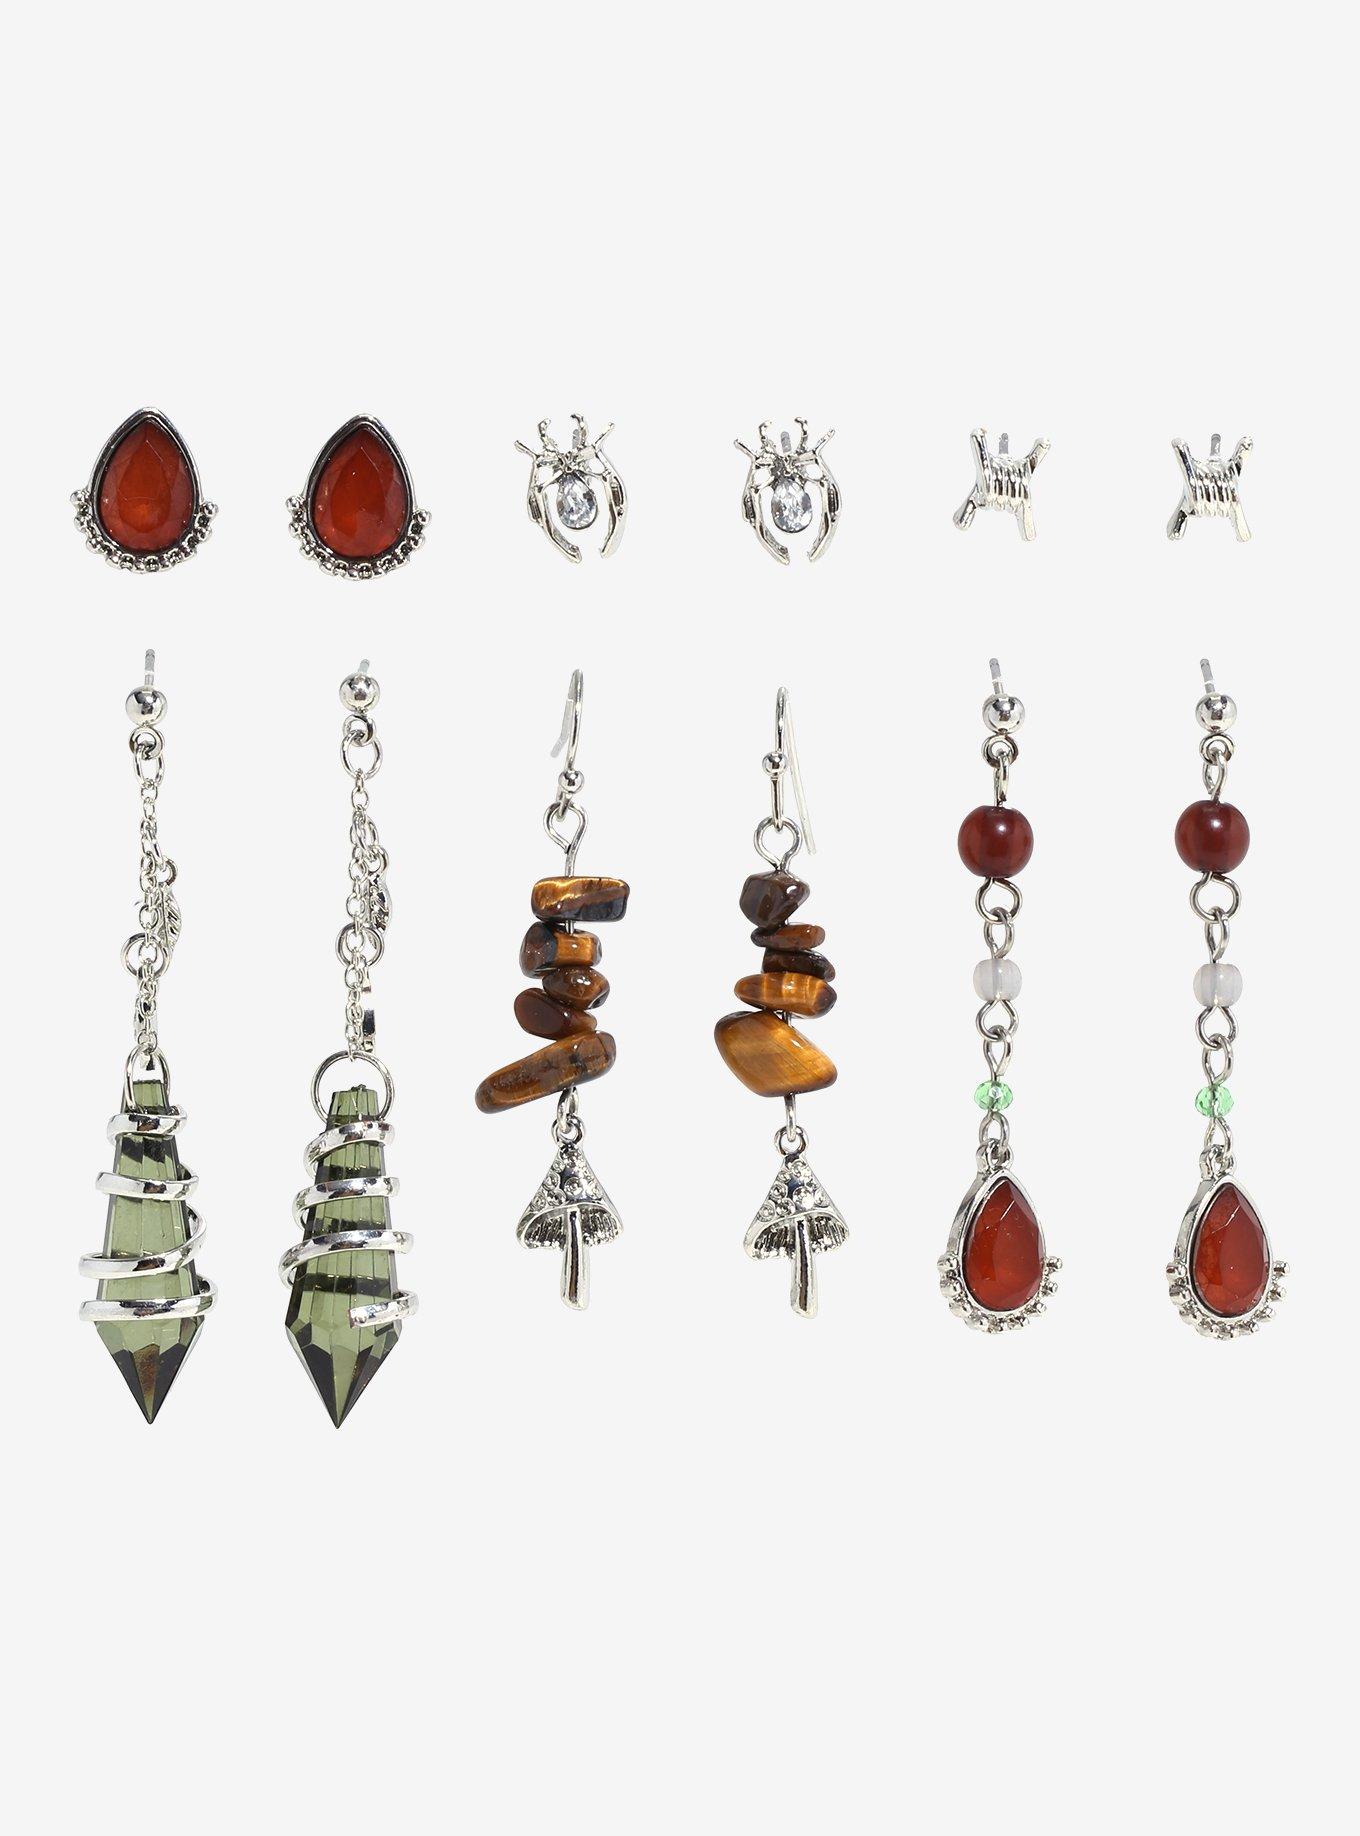 Thorn & Fable Spider Jewel Earring Set